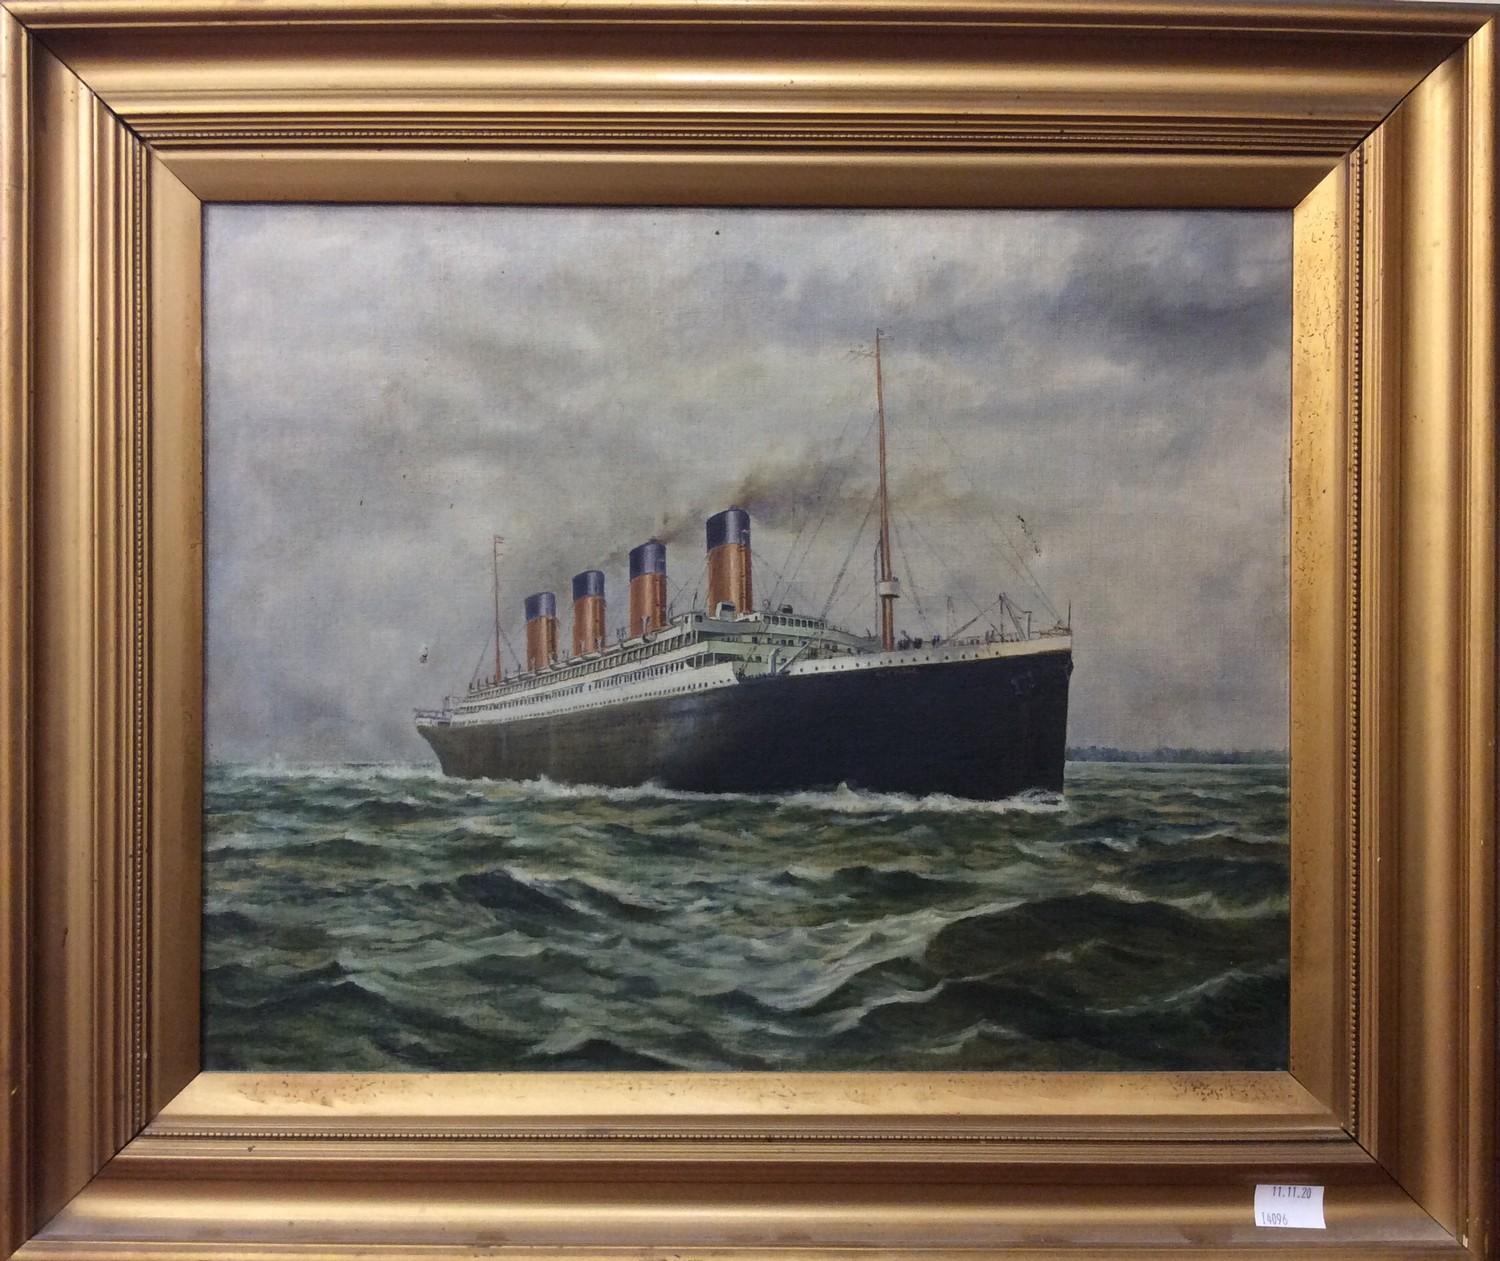 C. Notter (late 19th /early 20th century), White Star Line's RMS Olympic under steam and viewed